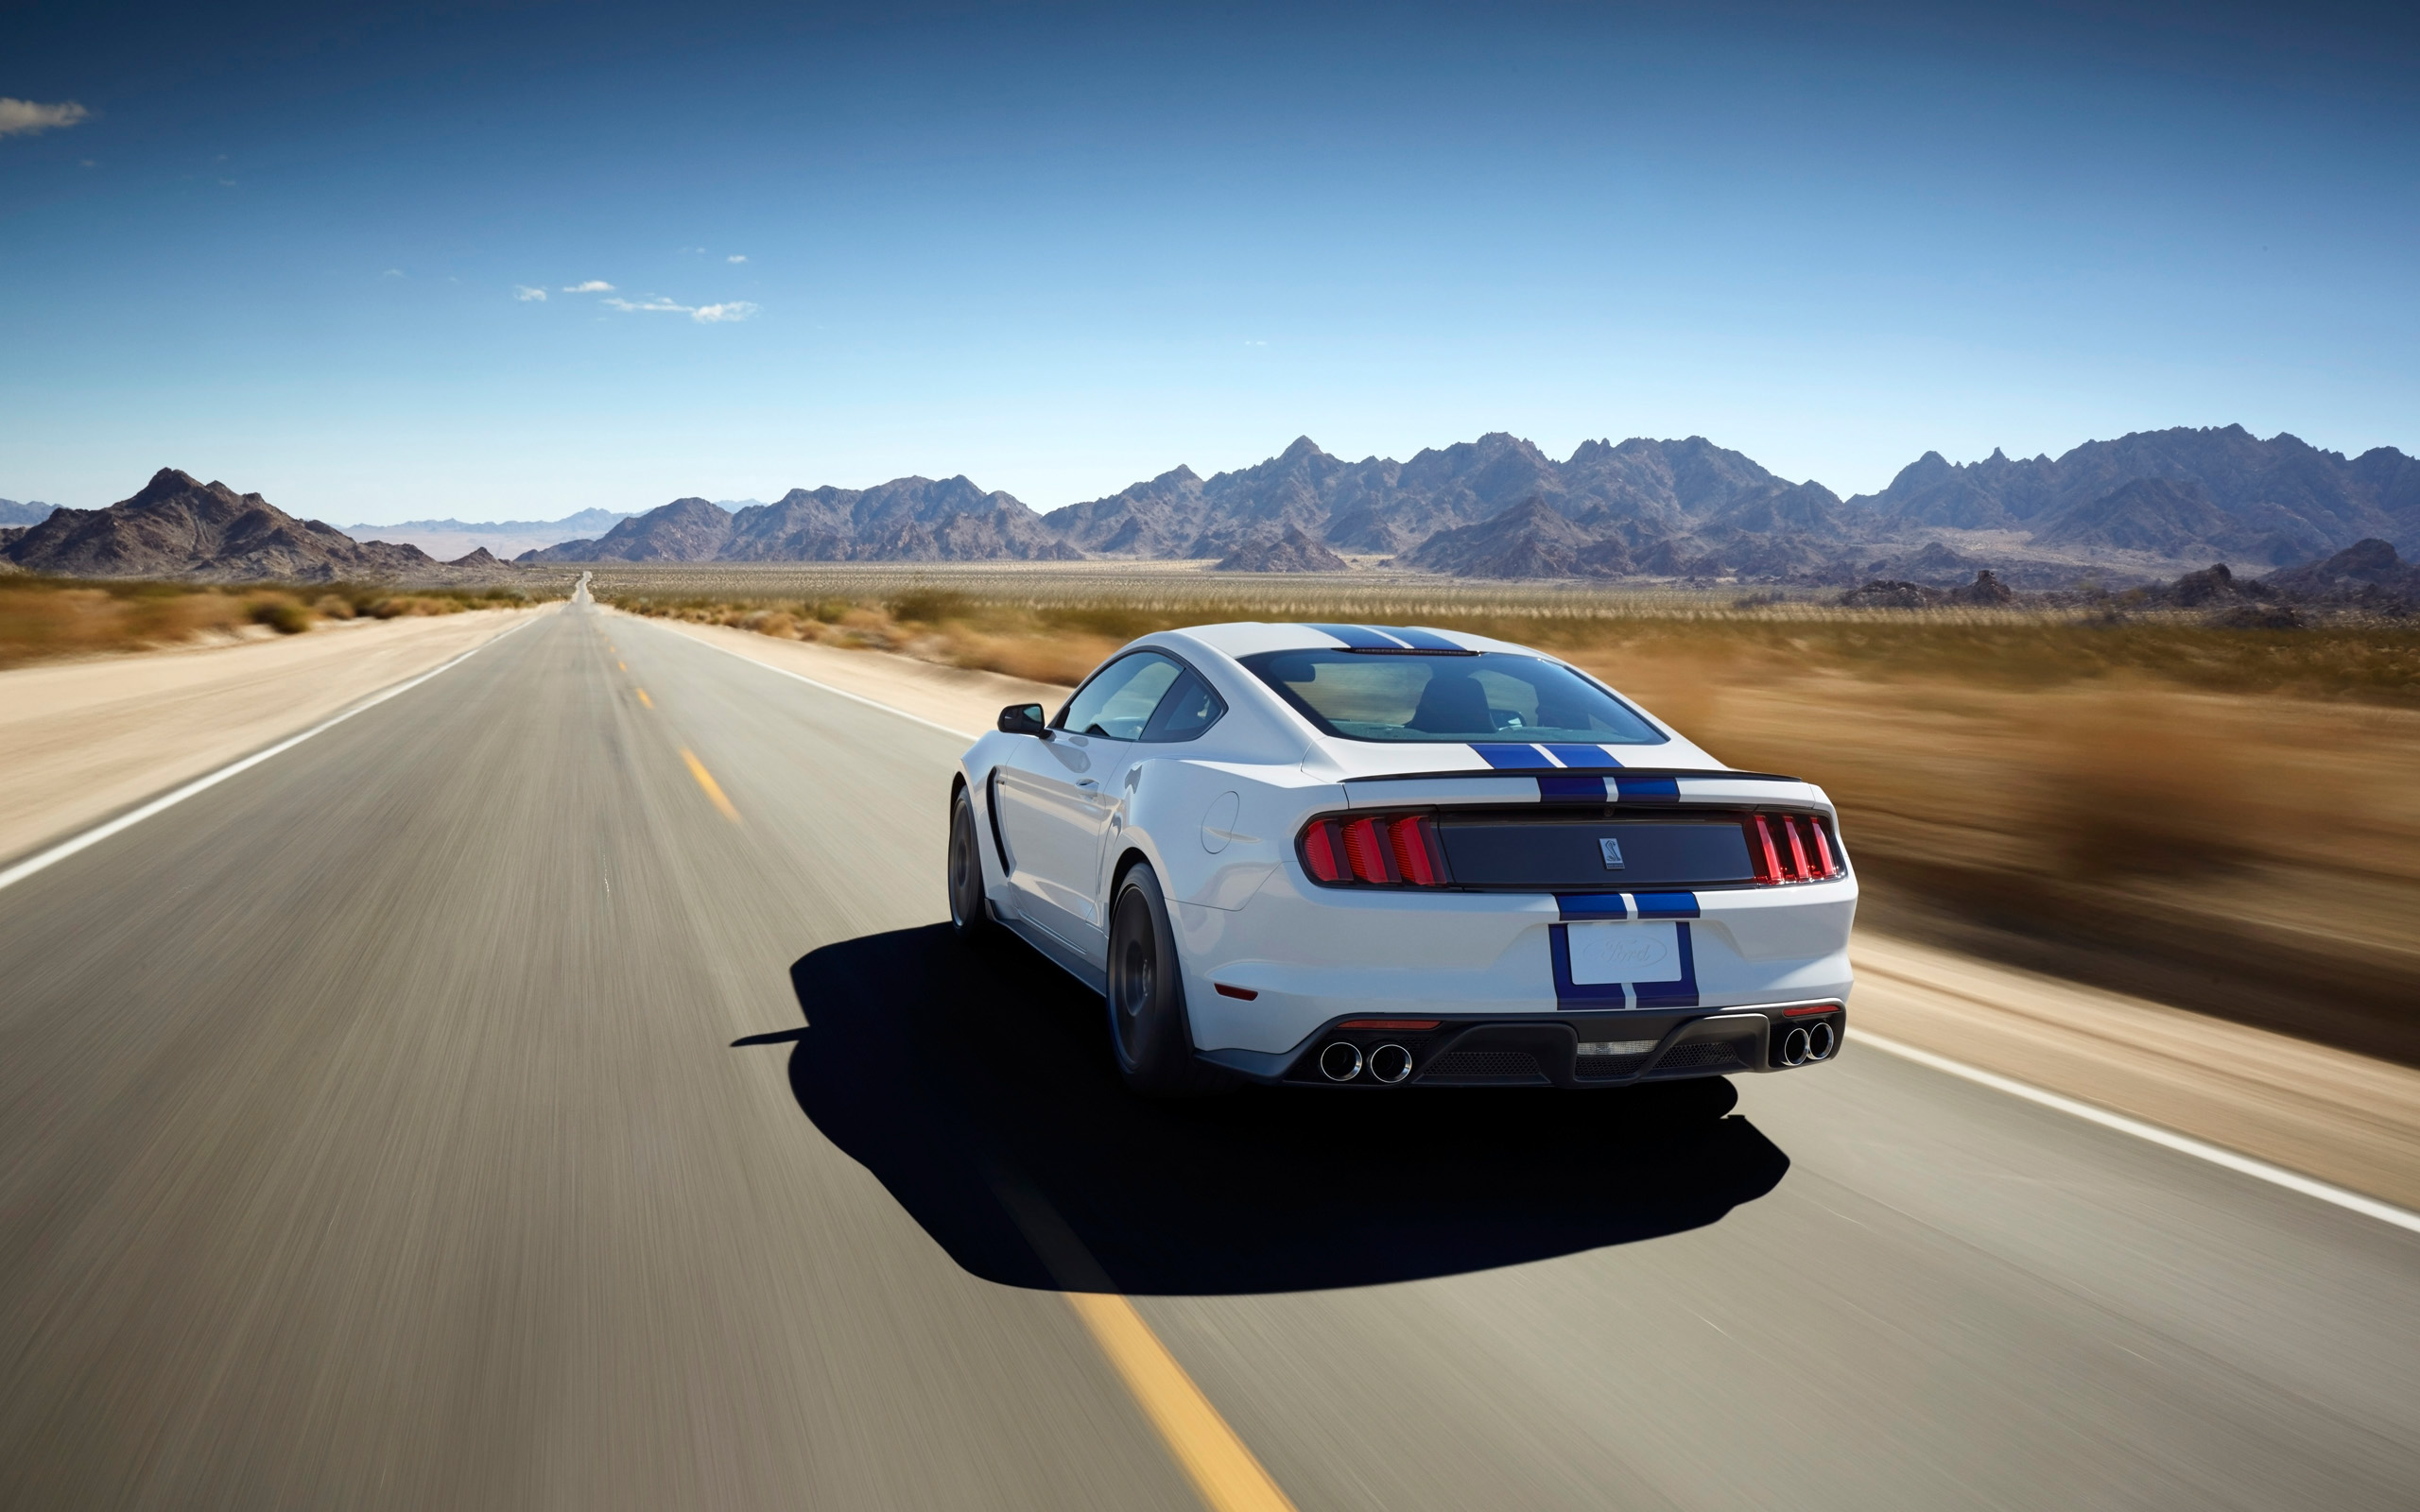 2015 Ford Shelby Gt350 Mustang 2related Car Wallpapers Wallpaper Cars Wallpaper Better